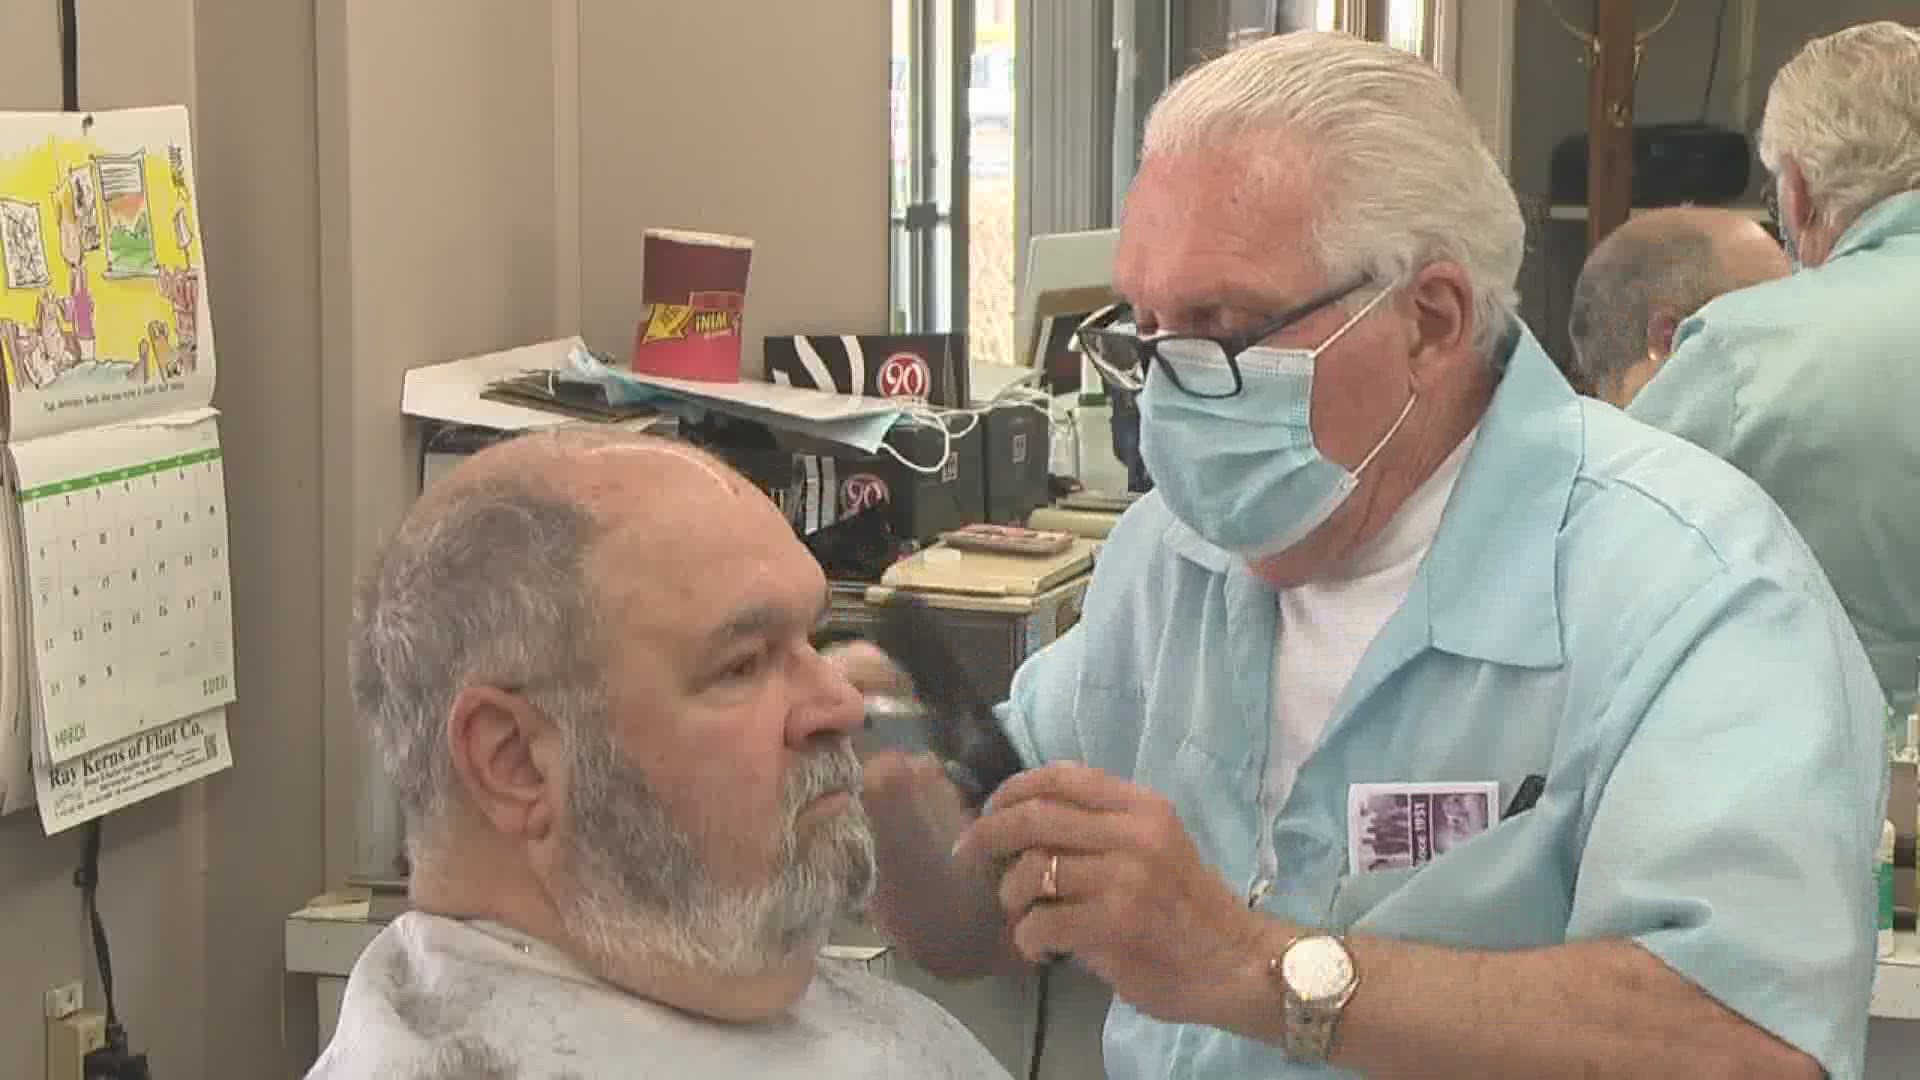 'Operation Haircut' planned for Wednesday at Michigan Capitol